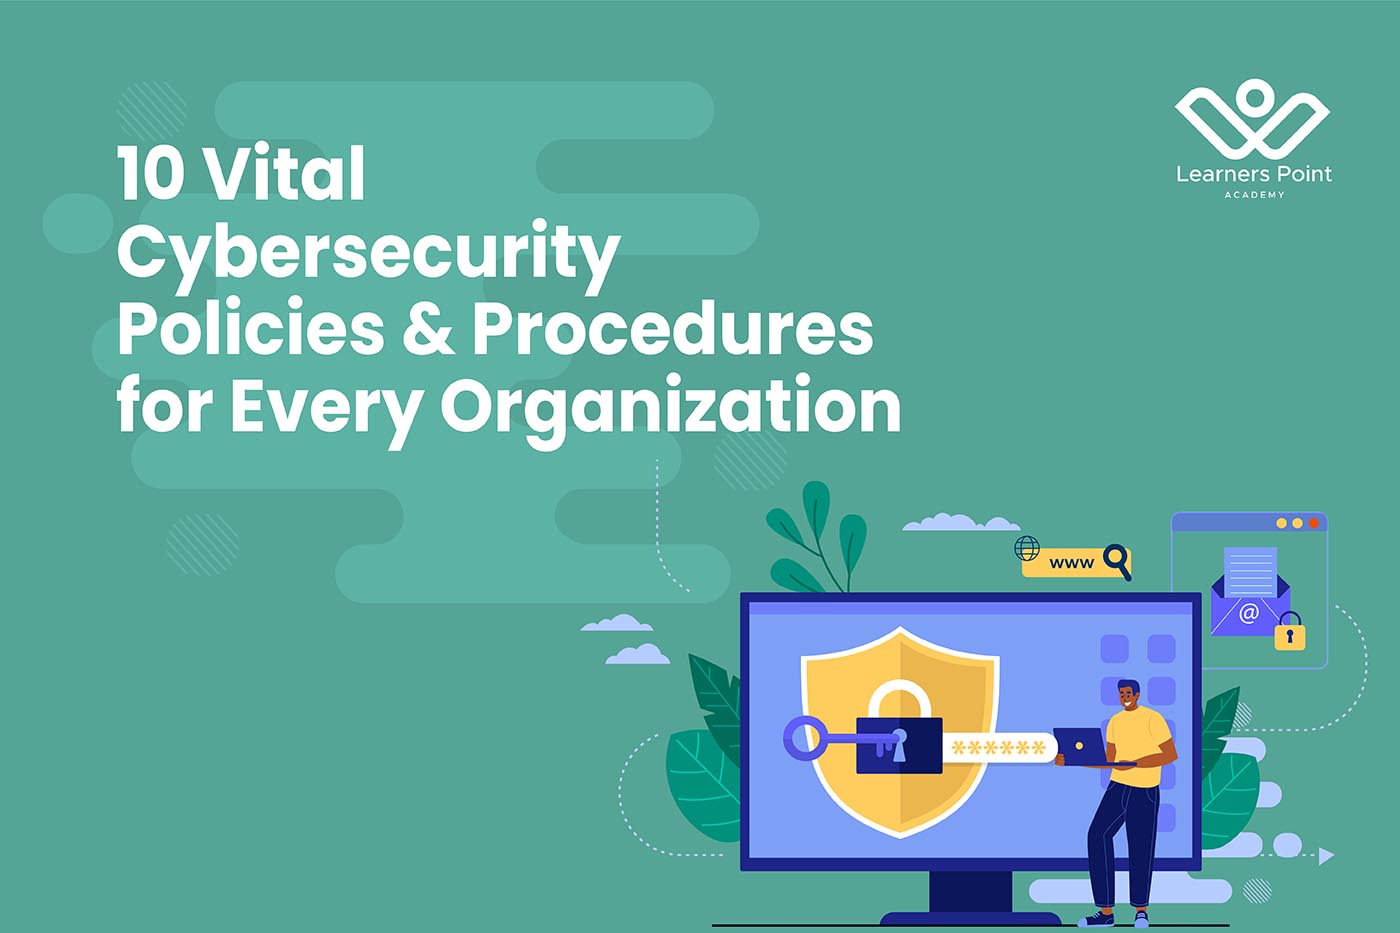 10 Vital Cybersecurity Policies & Procedures for Every Organization